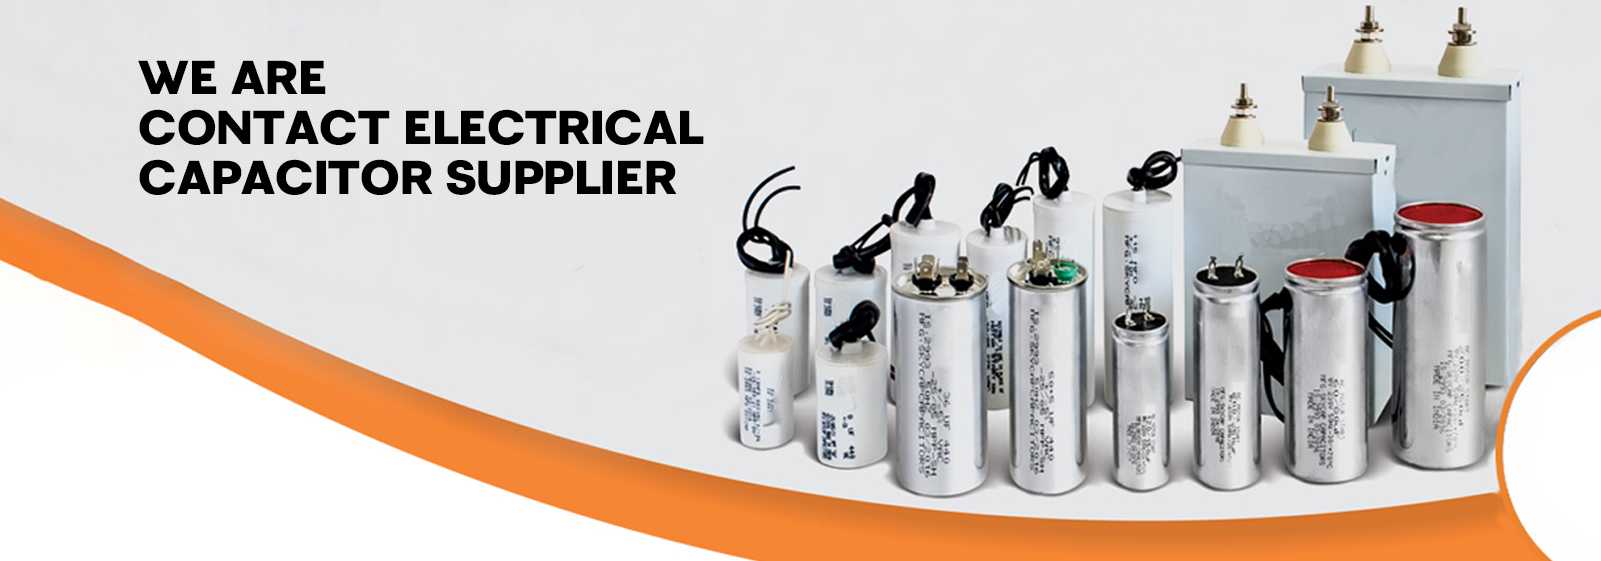 Contact Electrical Capacitor Supplier